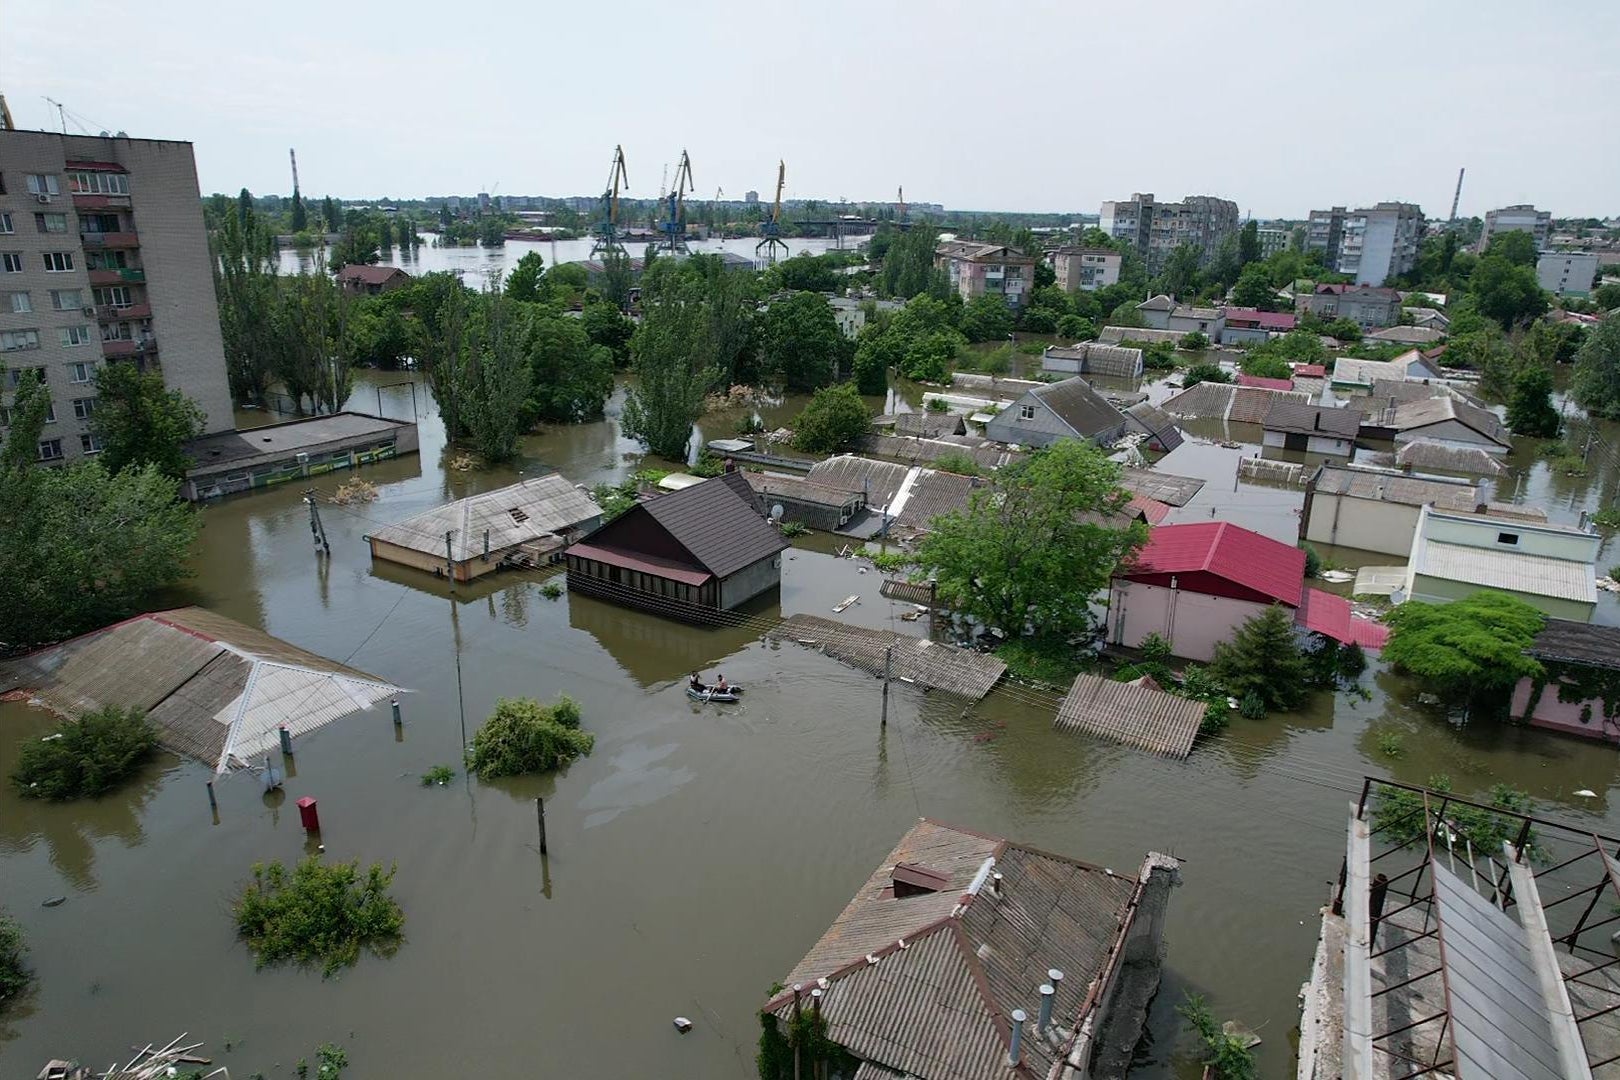 An overhead view of a flooded residential area, with two boaters floating between the buildings